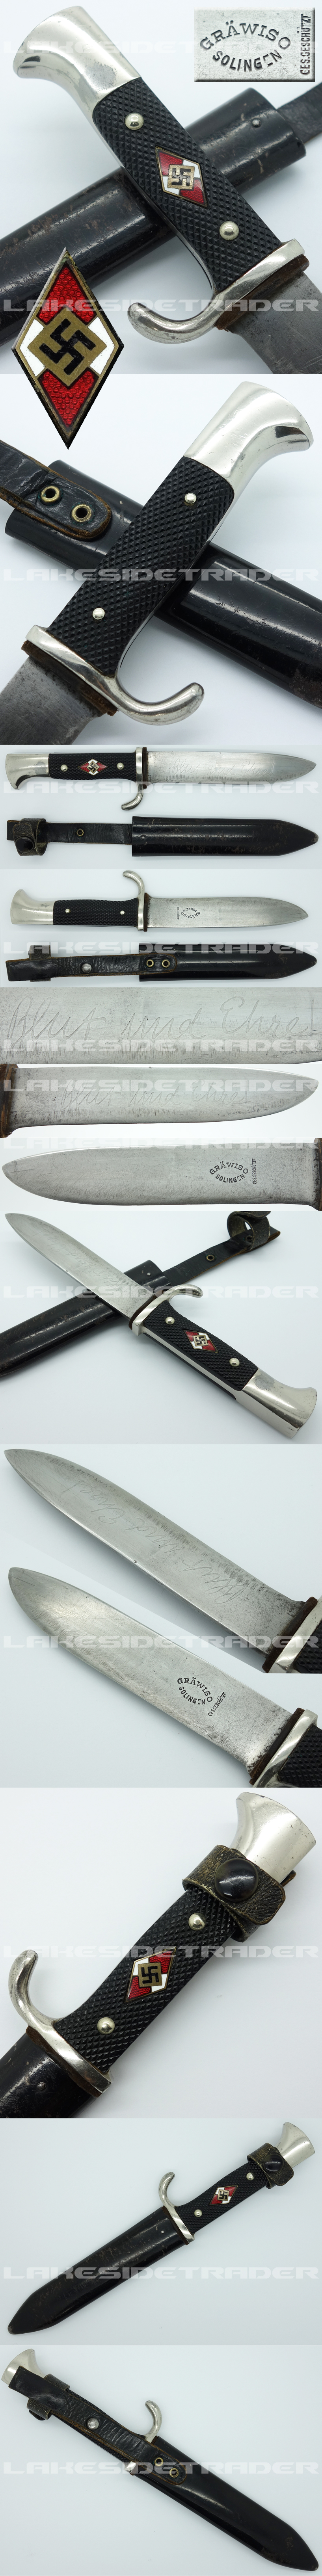 Early Hitler Youth Knife by Grawiso